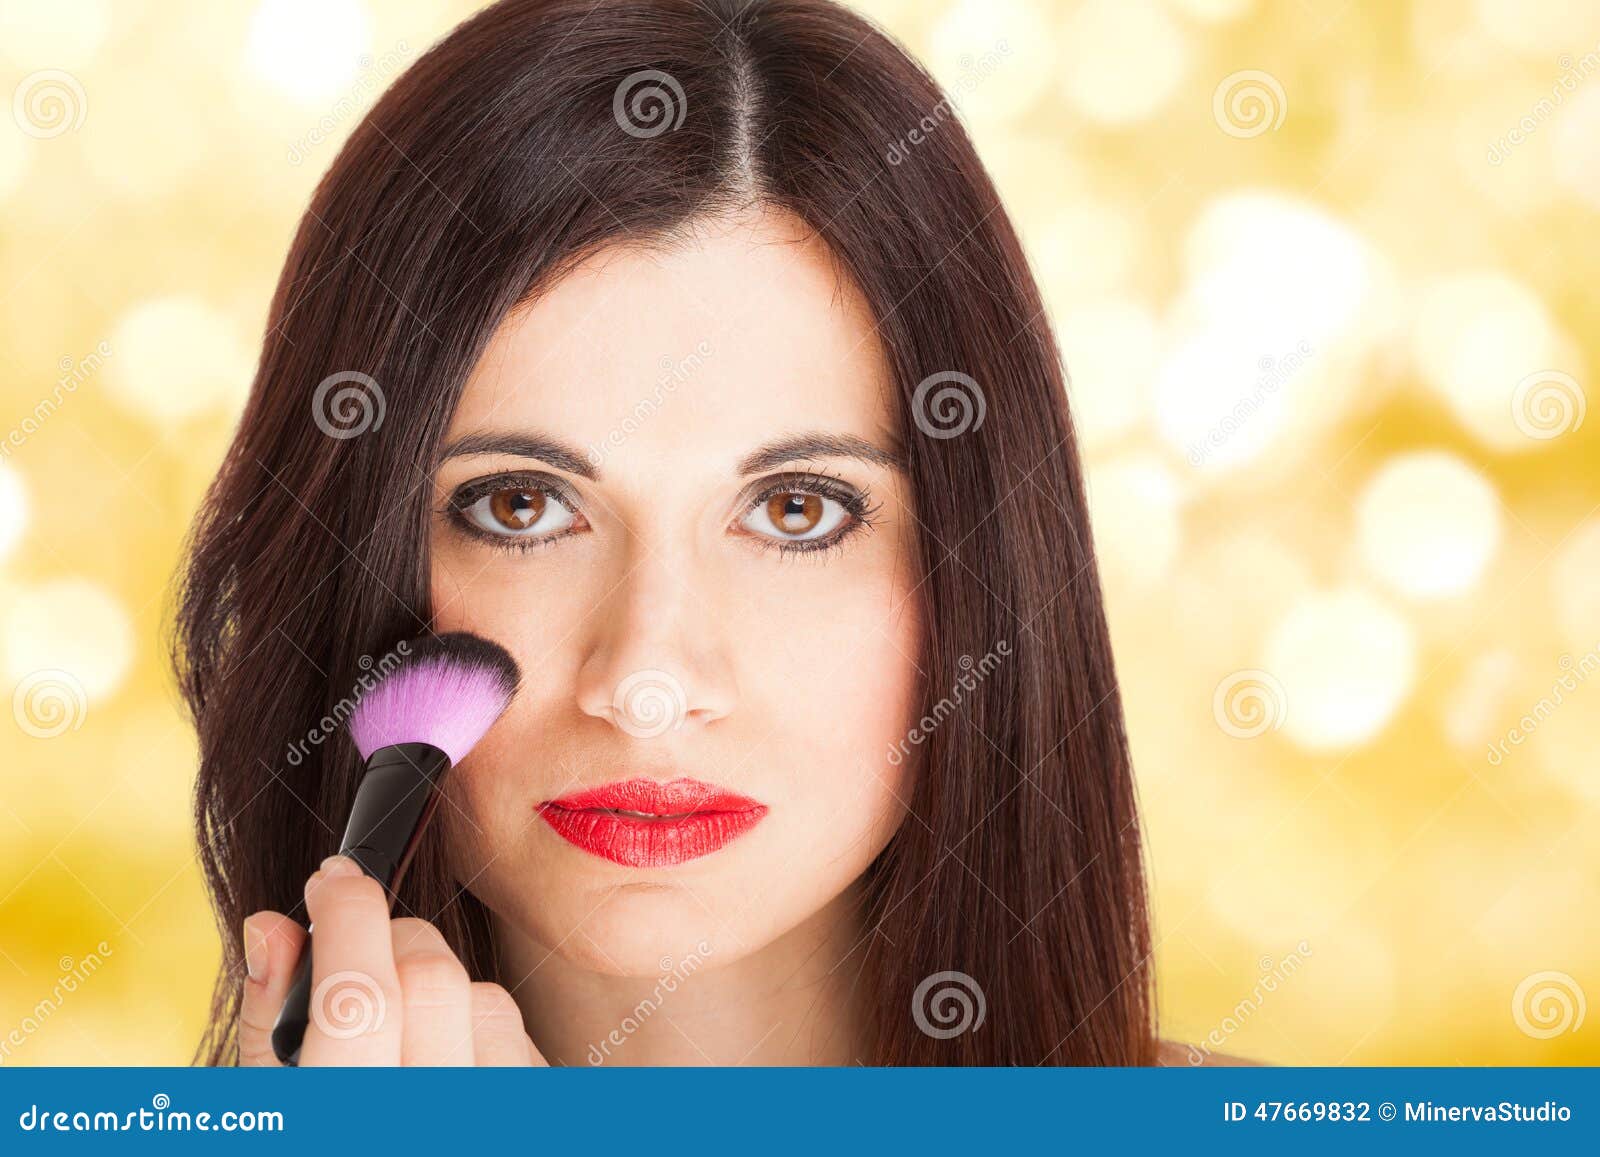 Portrait of a beautiful woman applying blusher on her face